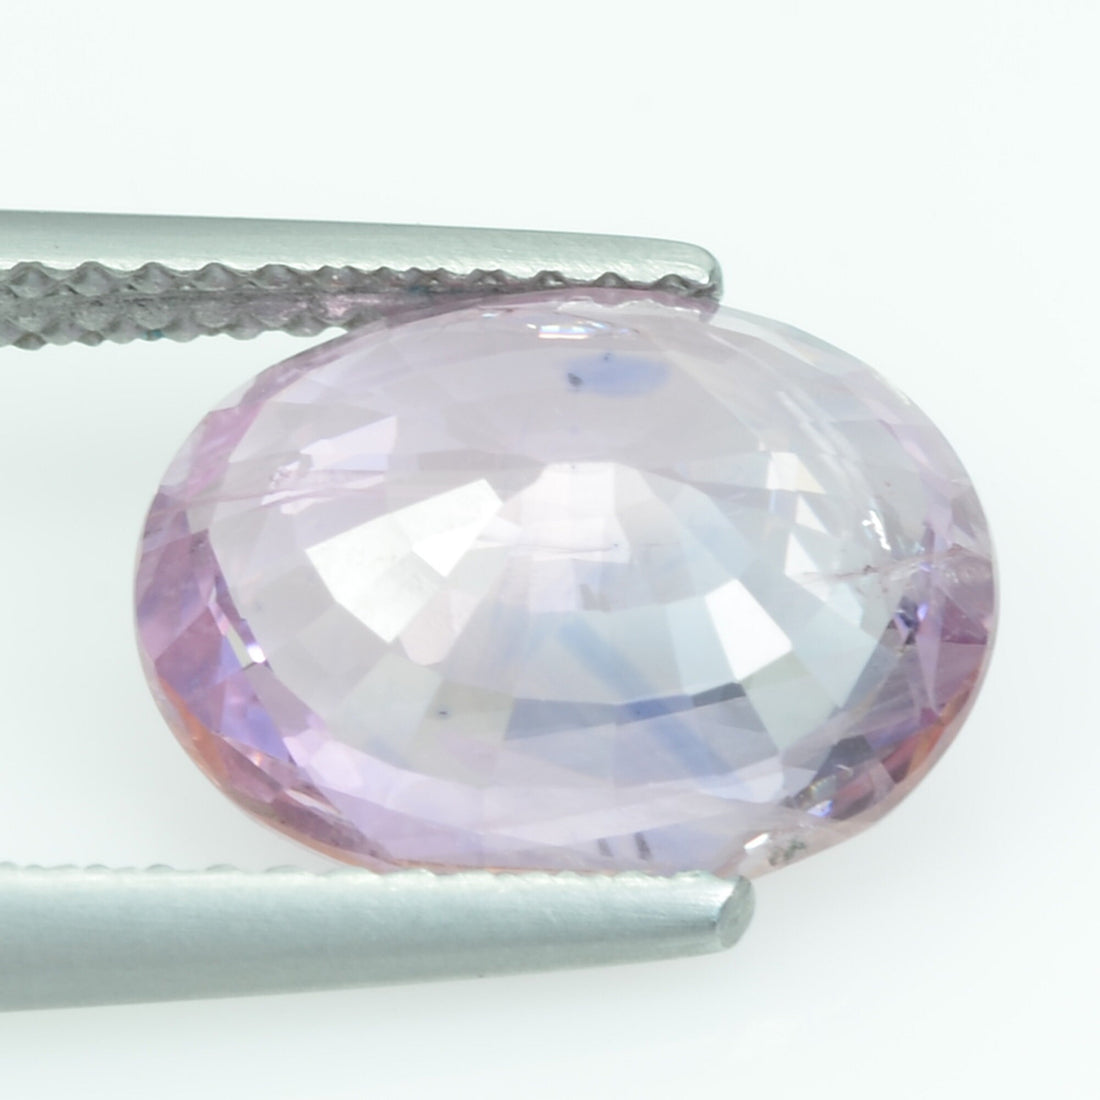 4.98 cts Natural Pink Sapphire Loose Gemstone oval Cut